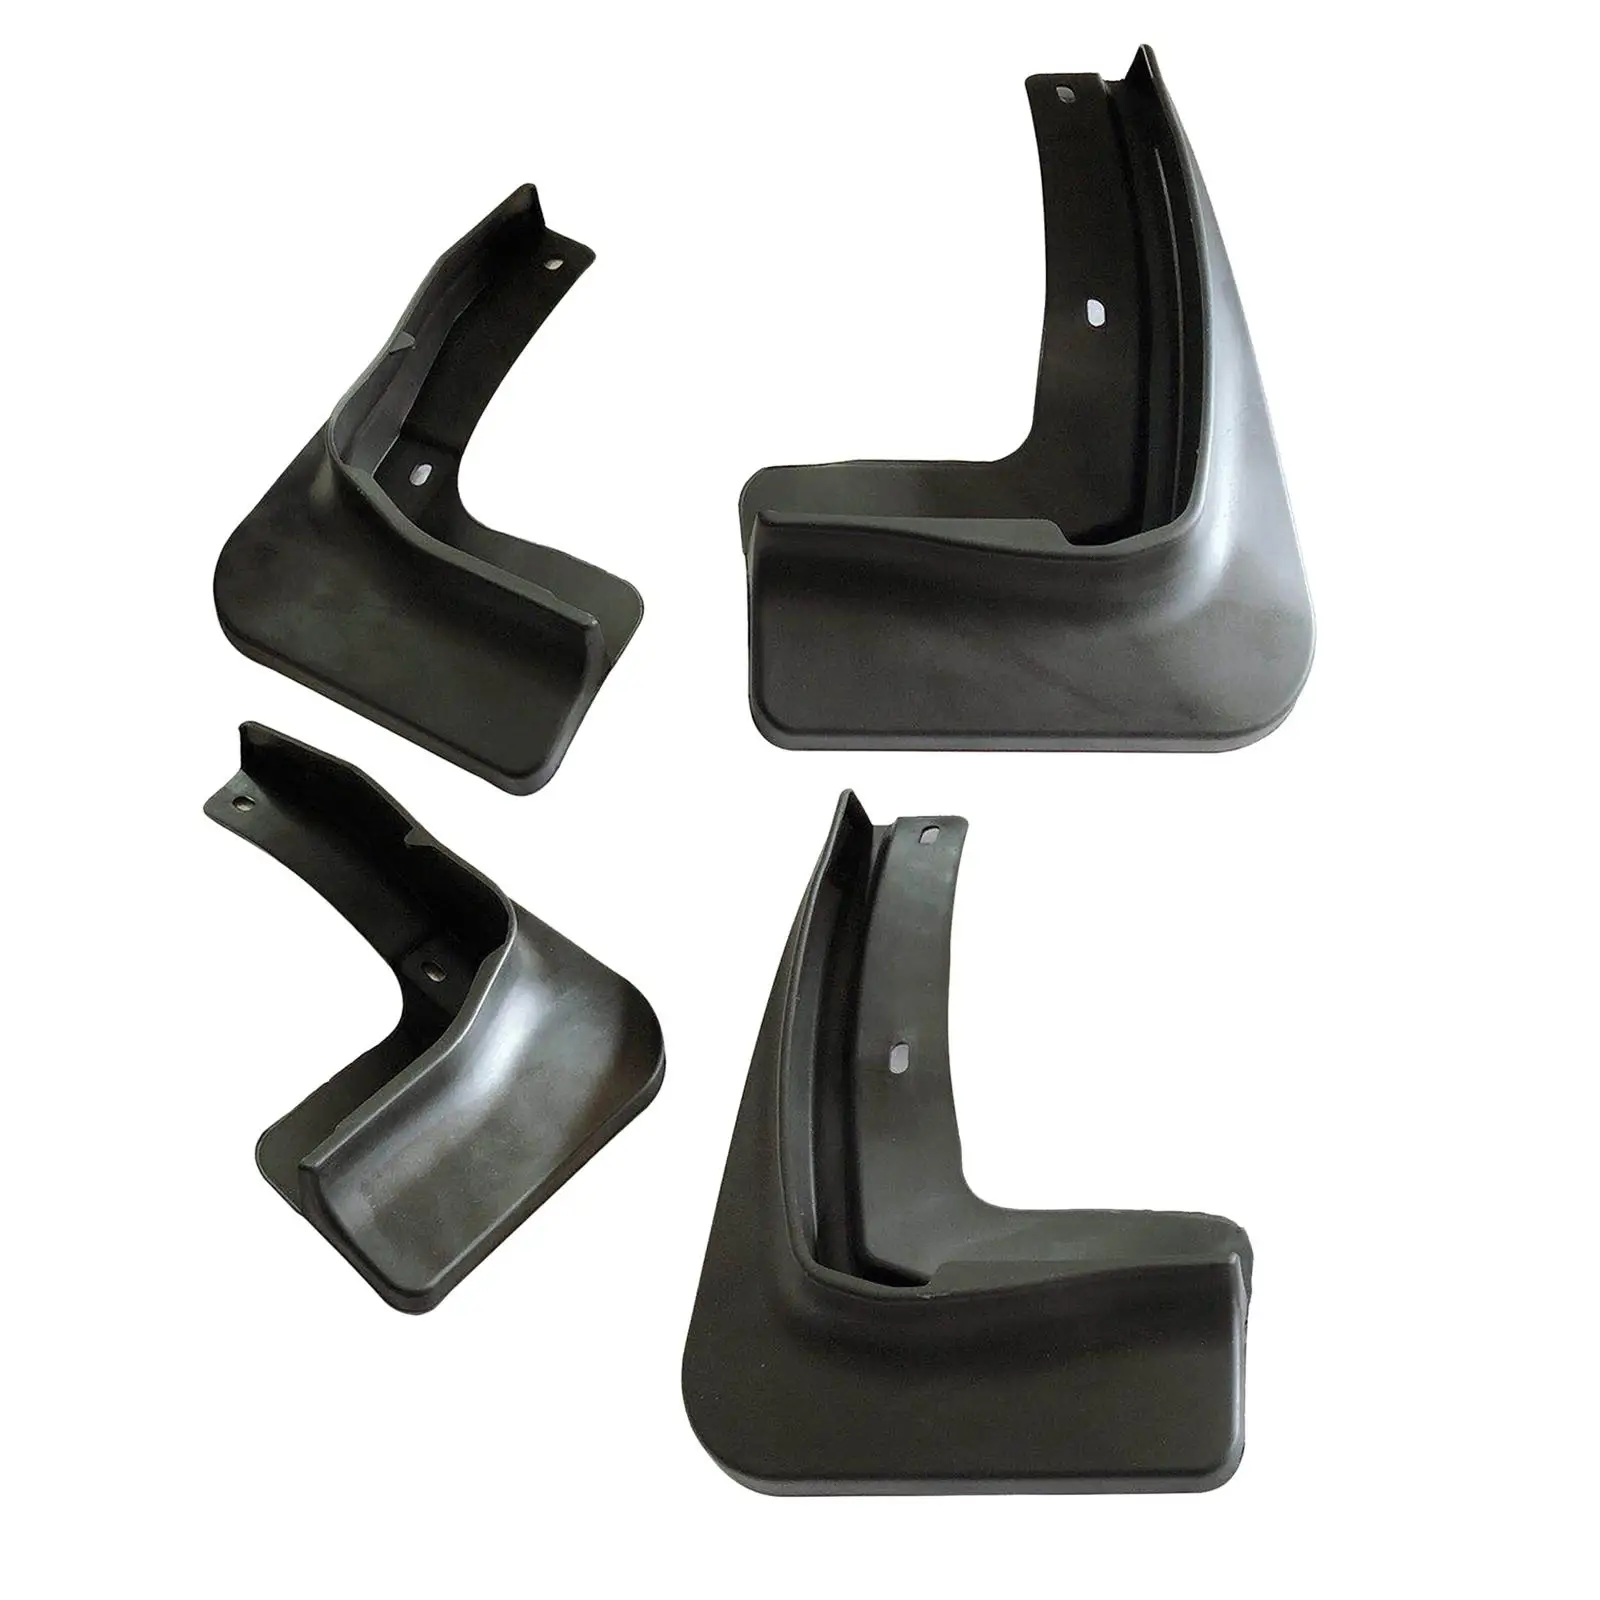 4x Car Mudguard Front Rear Replacement Accessories for Byd Yuan Plus